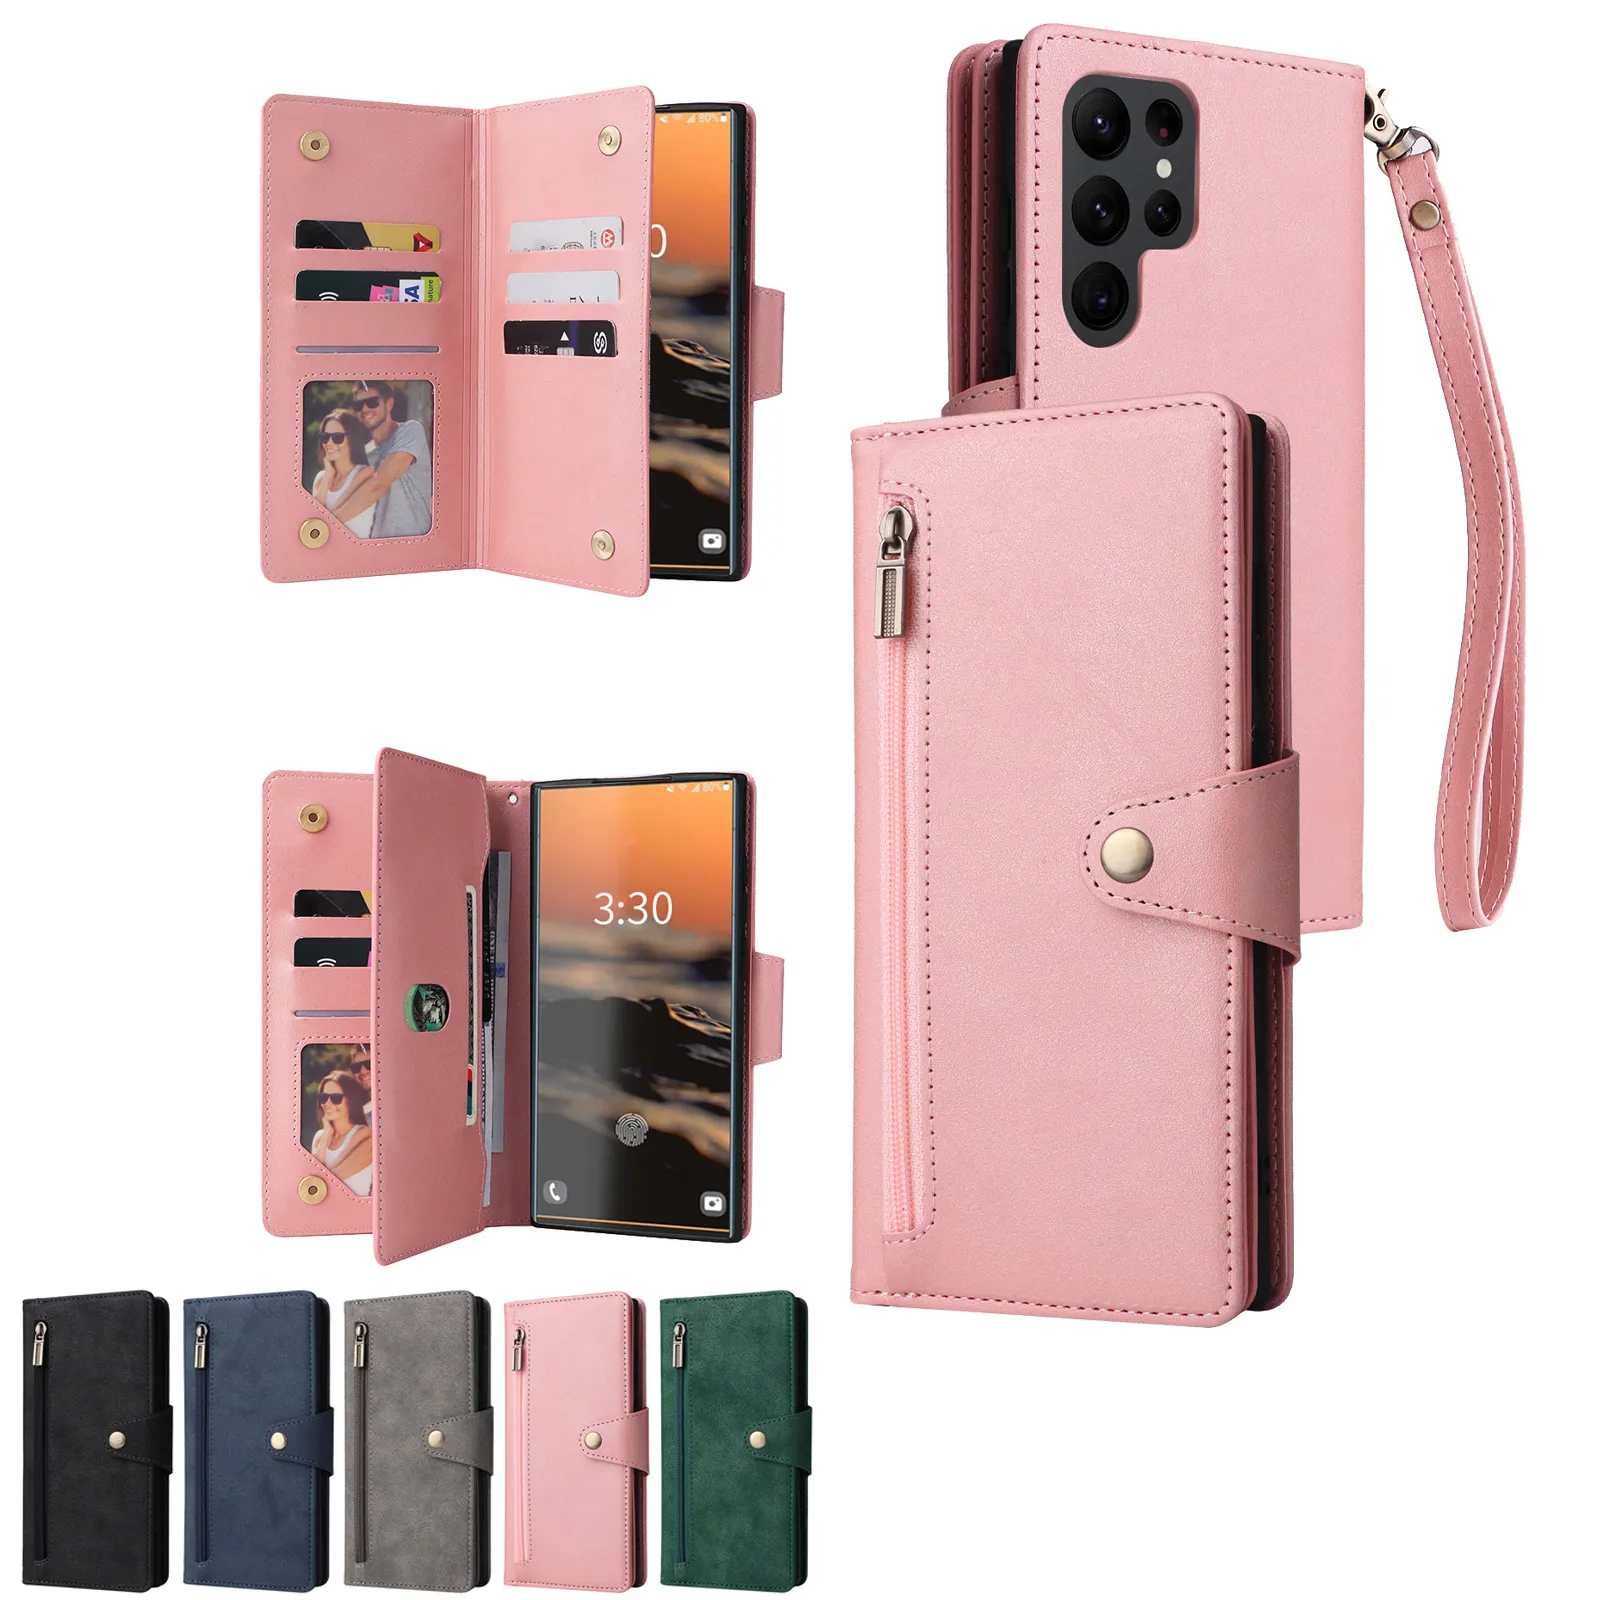 Shockproof PU Leather Zipper Card Slots Wallet Cases For Samsung Galaxy S23 Ultra S22 S21 FE S20 Plus Note 20 A53 A33 A73 Flip Stand Phone Cover Funda